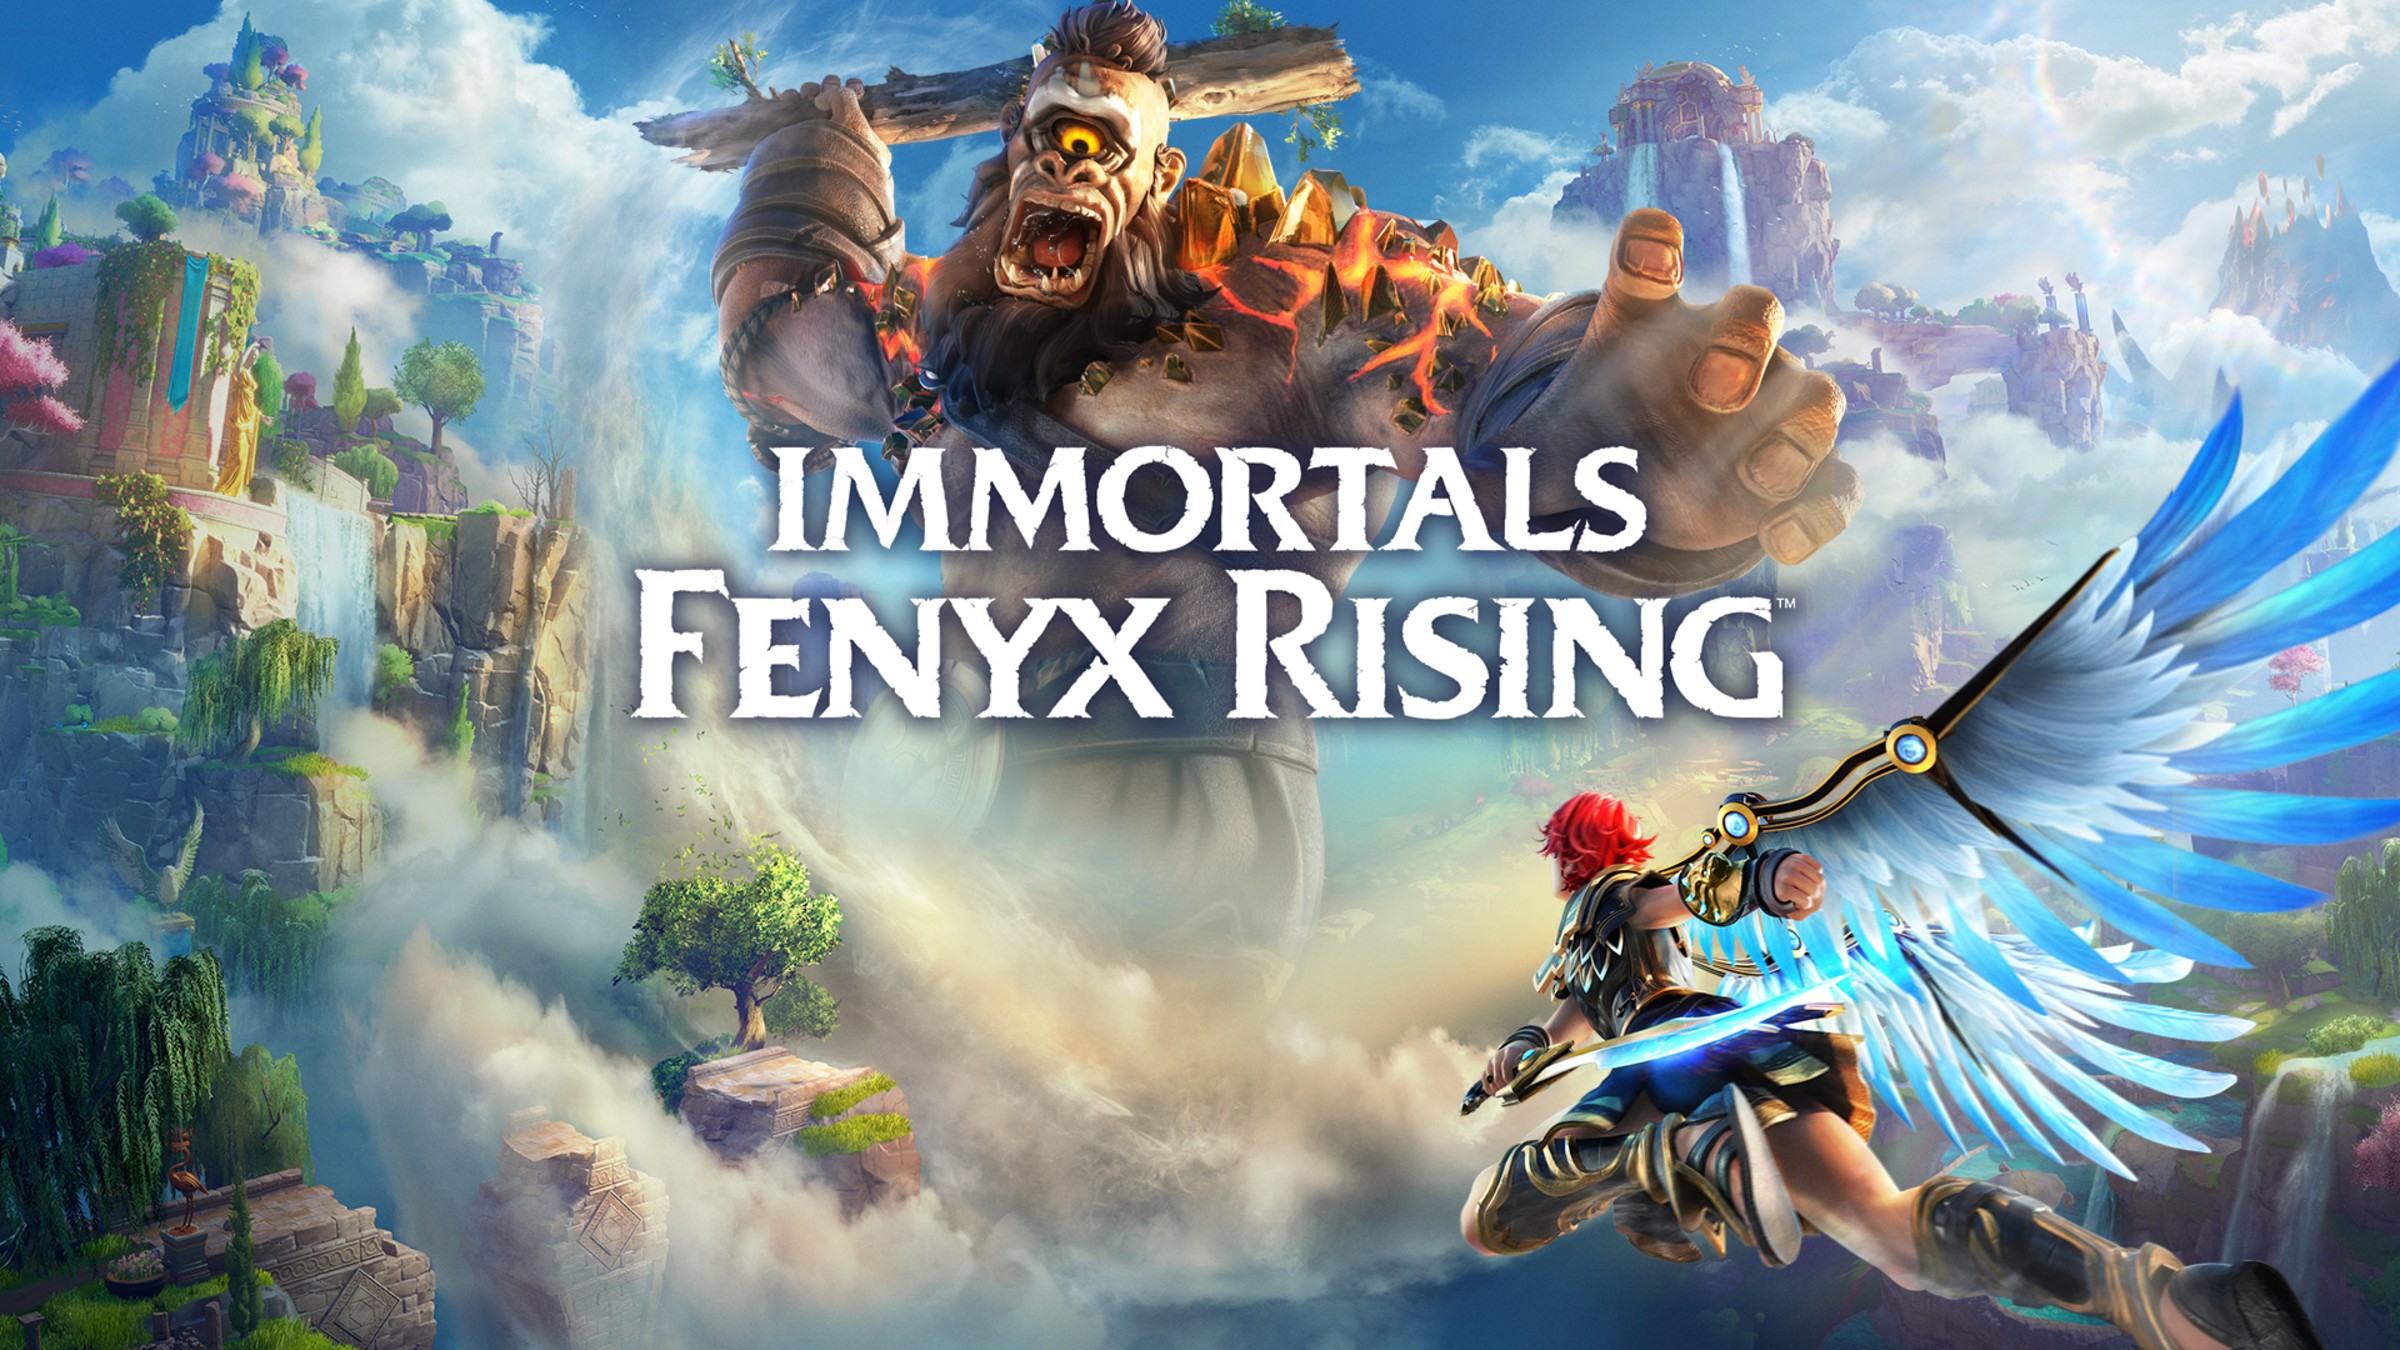 Official Rising™ Switch Fenyx Nintendo Immortals Site - for Nintendo